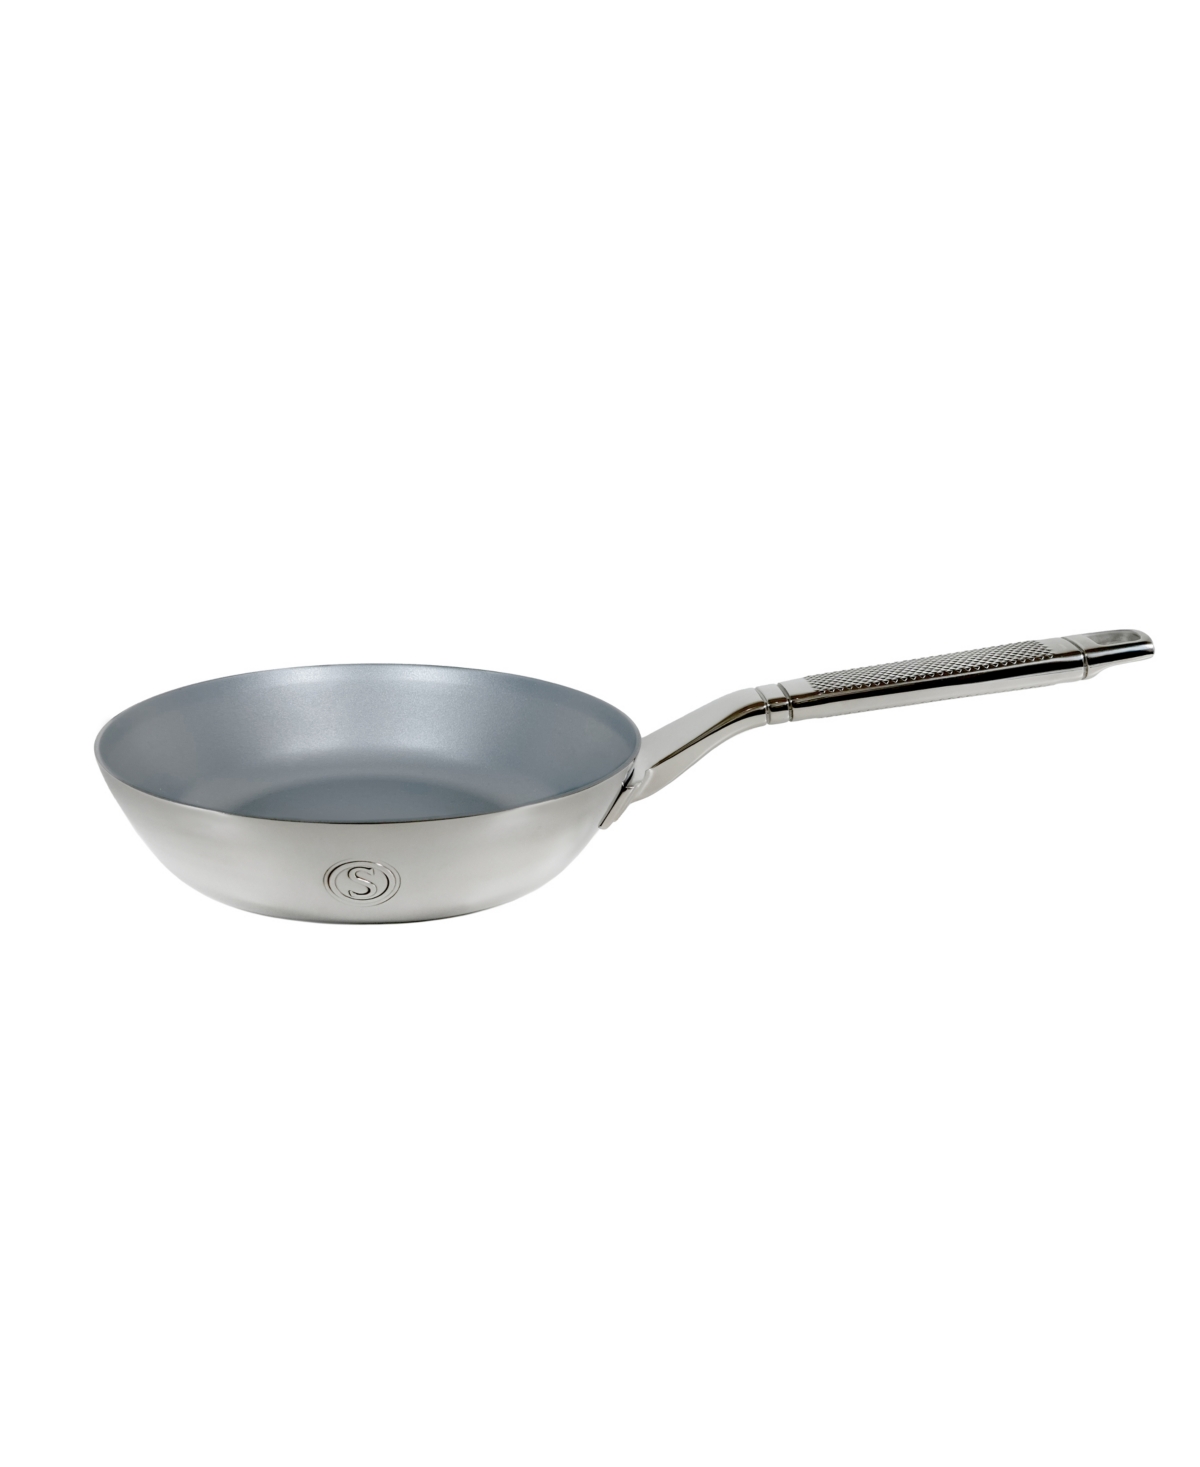 Shop Saveur Selects Tri-ply Stainless Steel 8" Non-stick Open Fry Pan